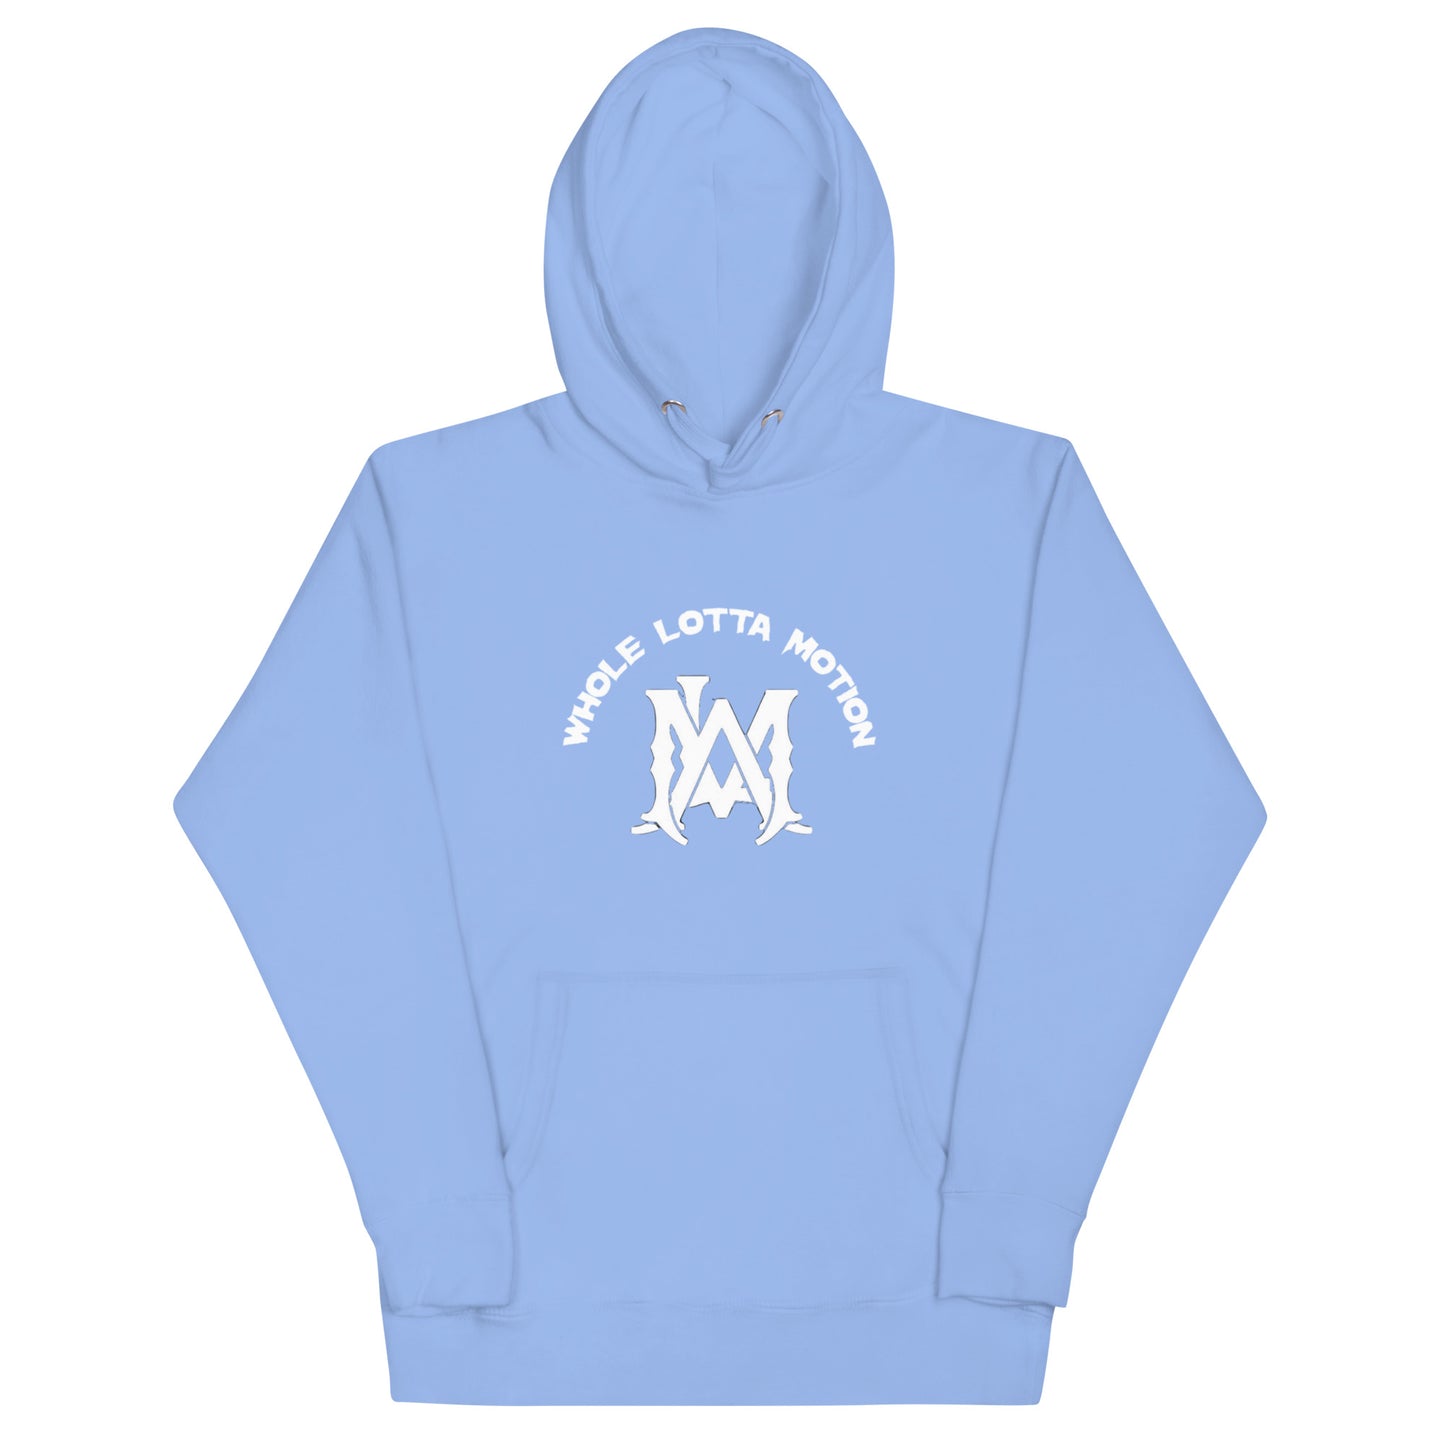 Classic Whole Lotta Motion Hoodie